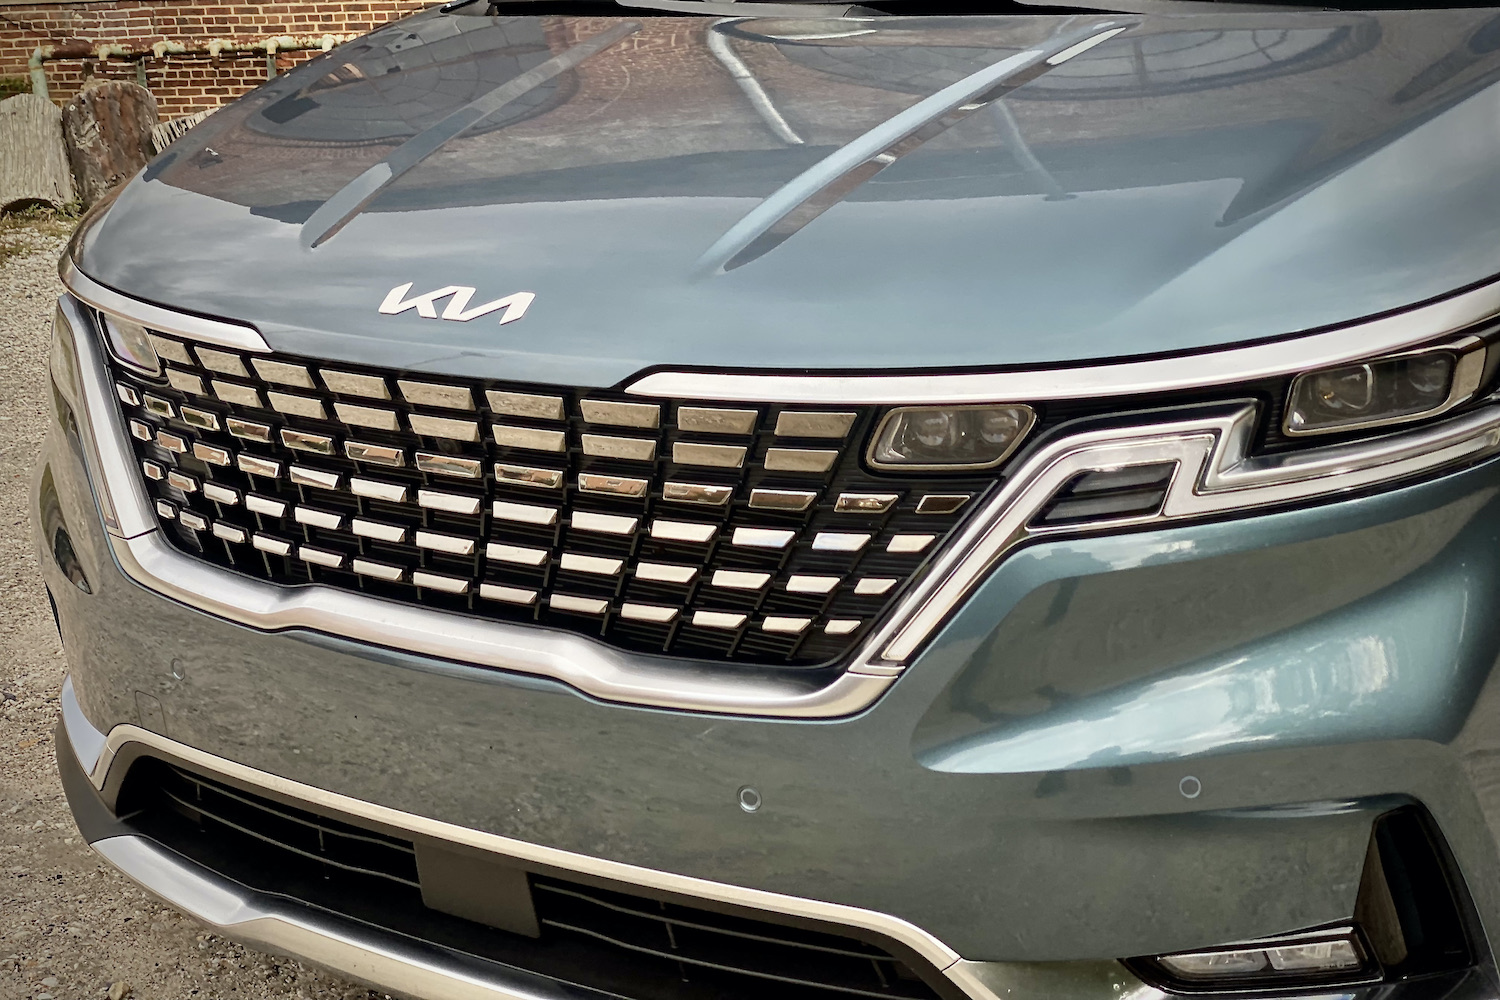 Kia Carnival grille close up with daytime running lights on.